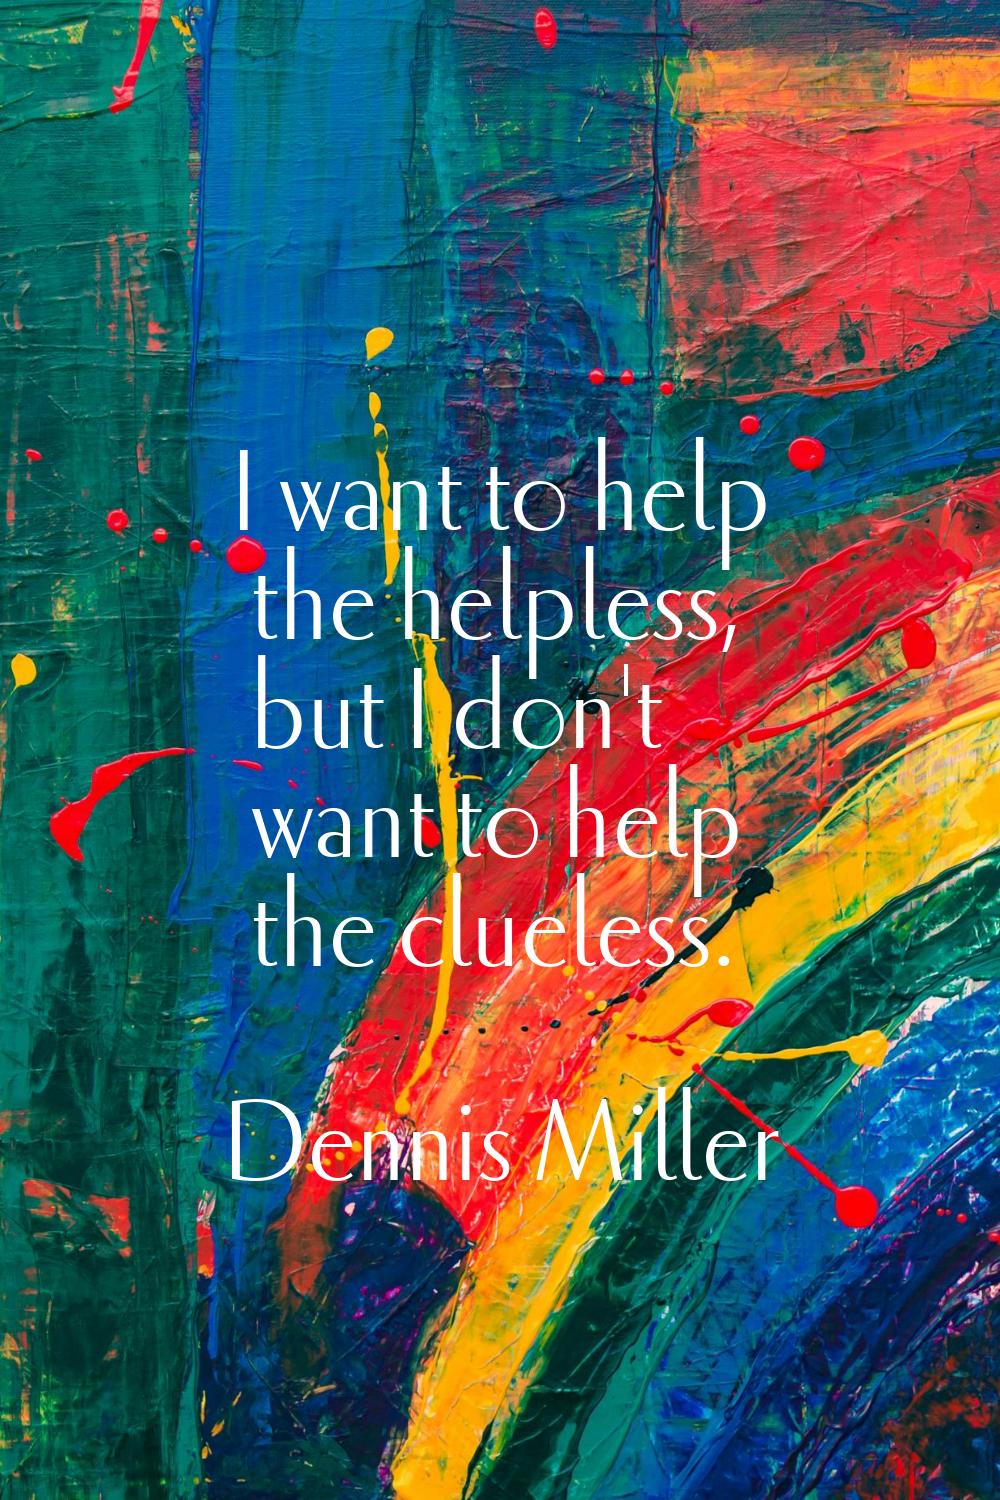 I want to help the helpless, but I don't want to help the clueless.